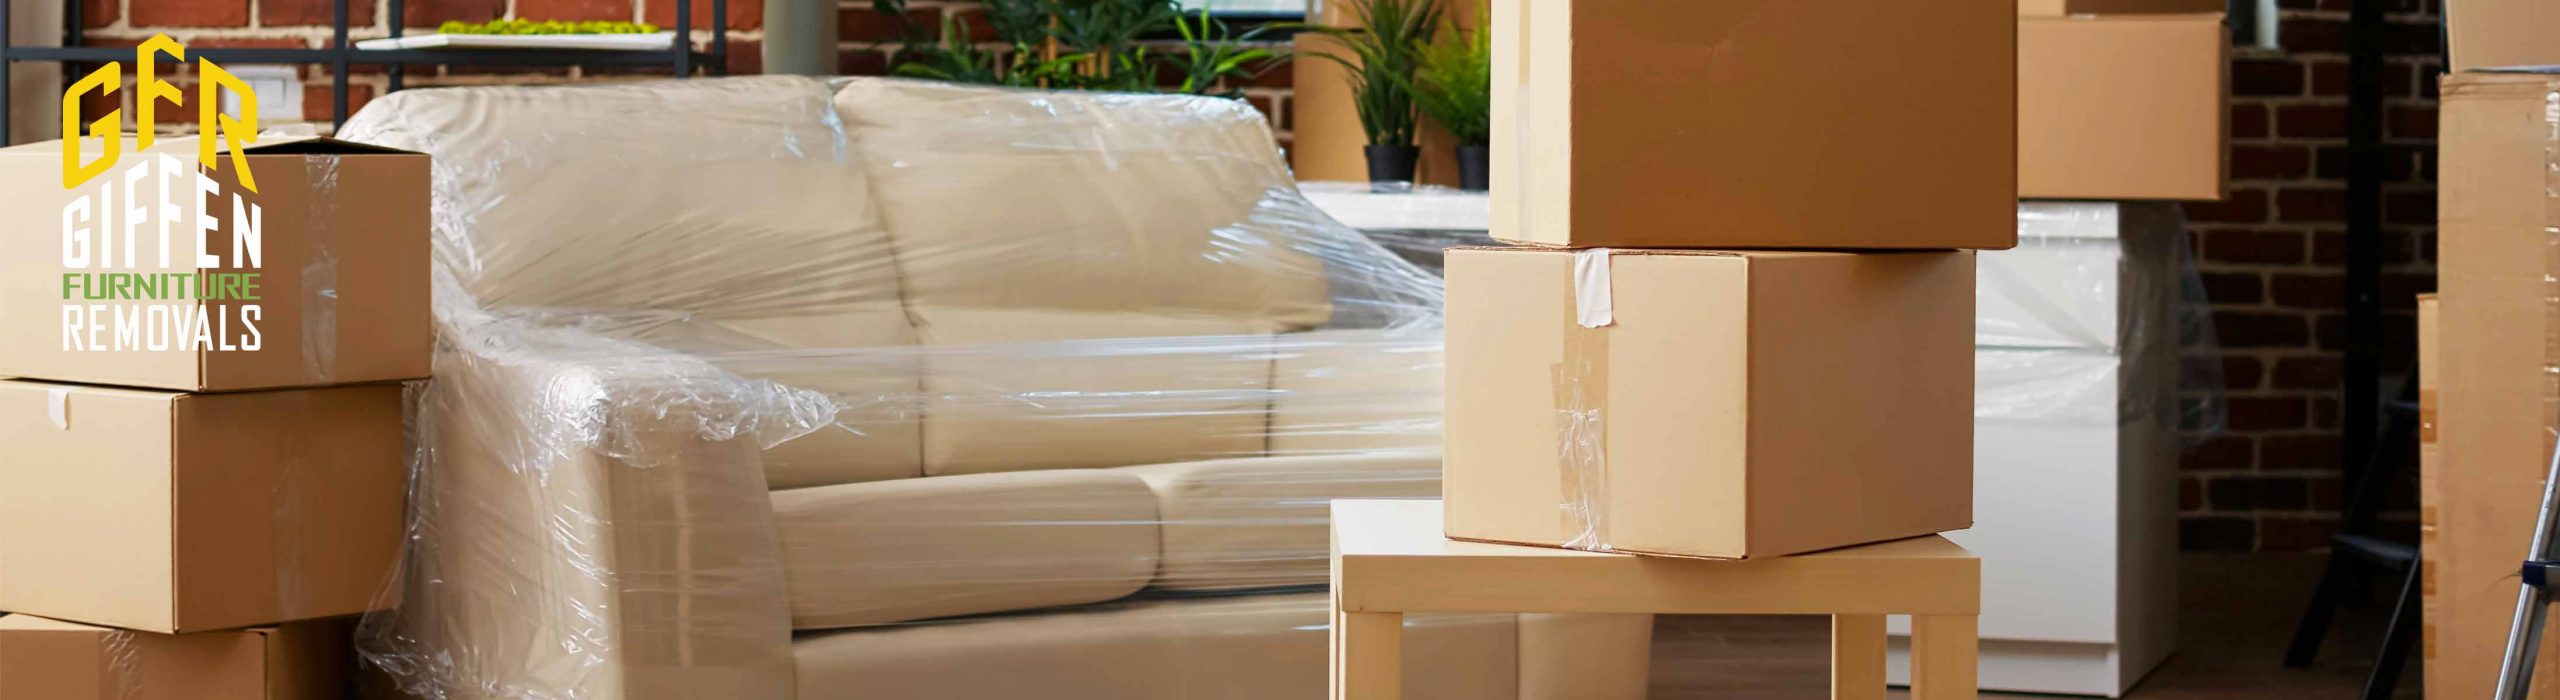 Giffen Furniture Removals Pre-packing Furniture For Your House Move